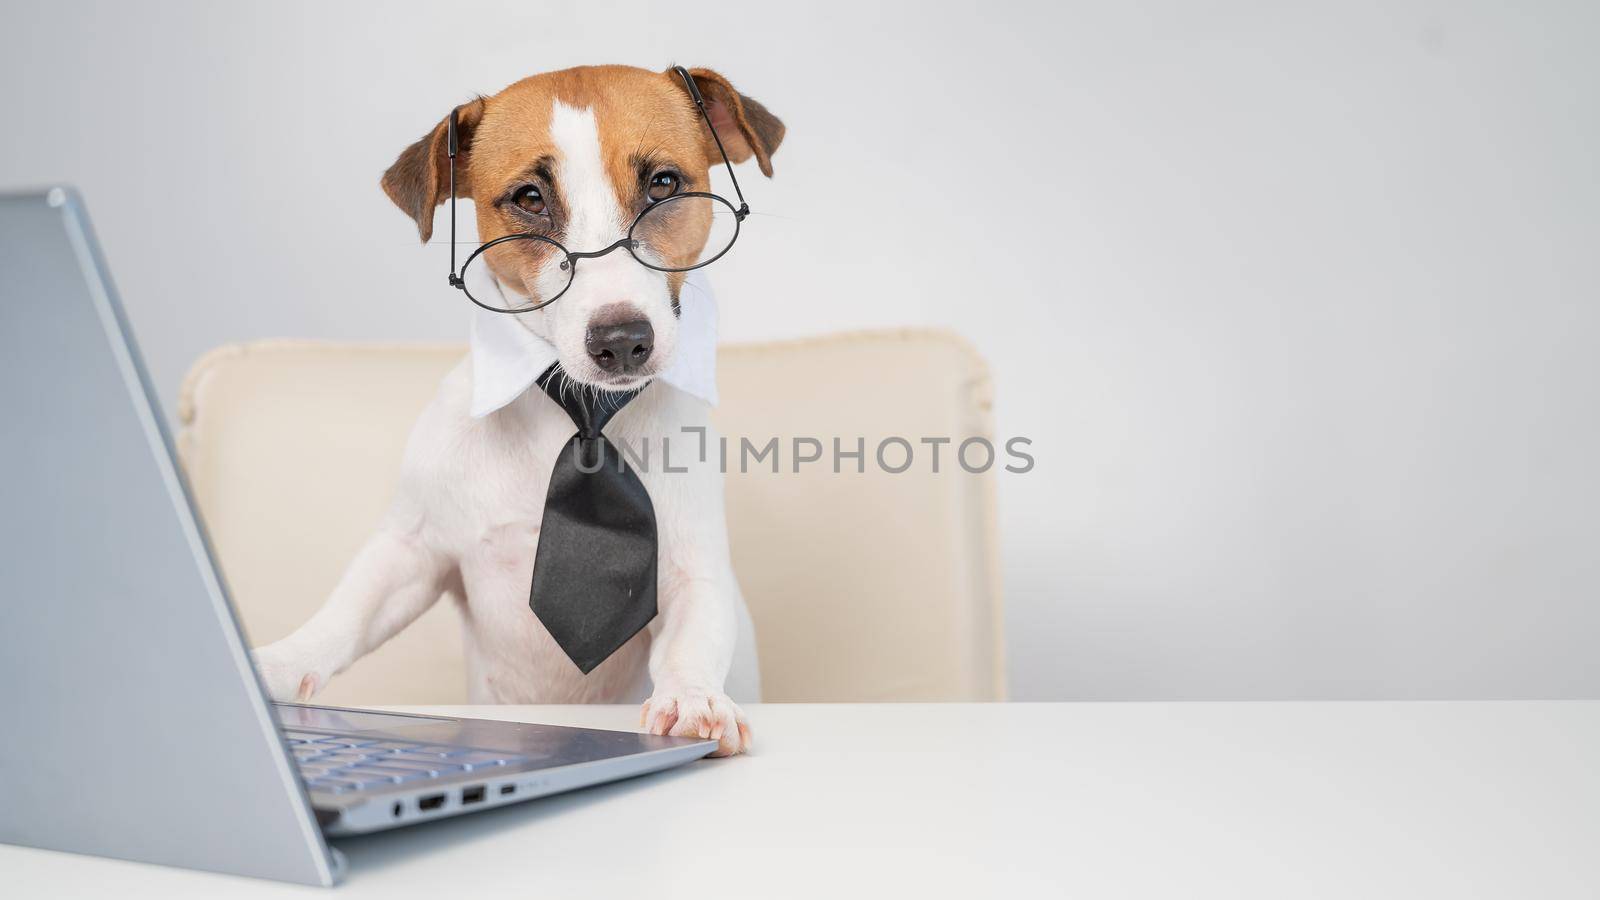 Dog jack russell terrier in glasses and a tie sits at a desk and works at a computer on a white background. Humorous depiction of a boss pet. by mrwed54